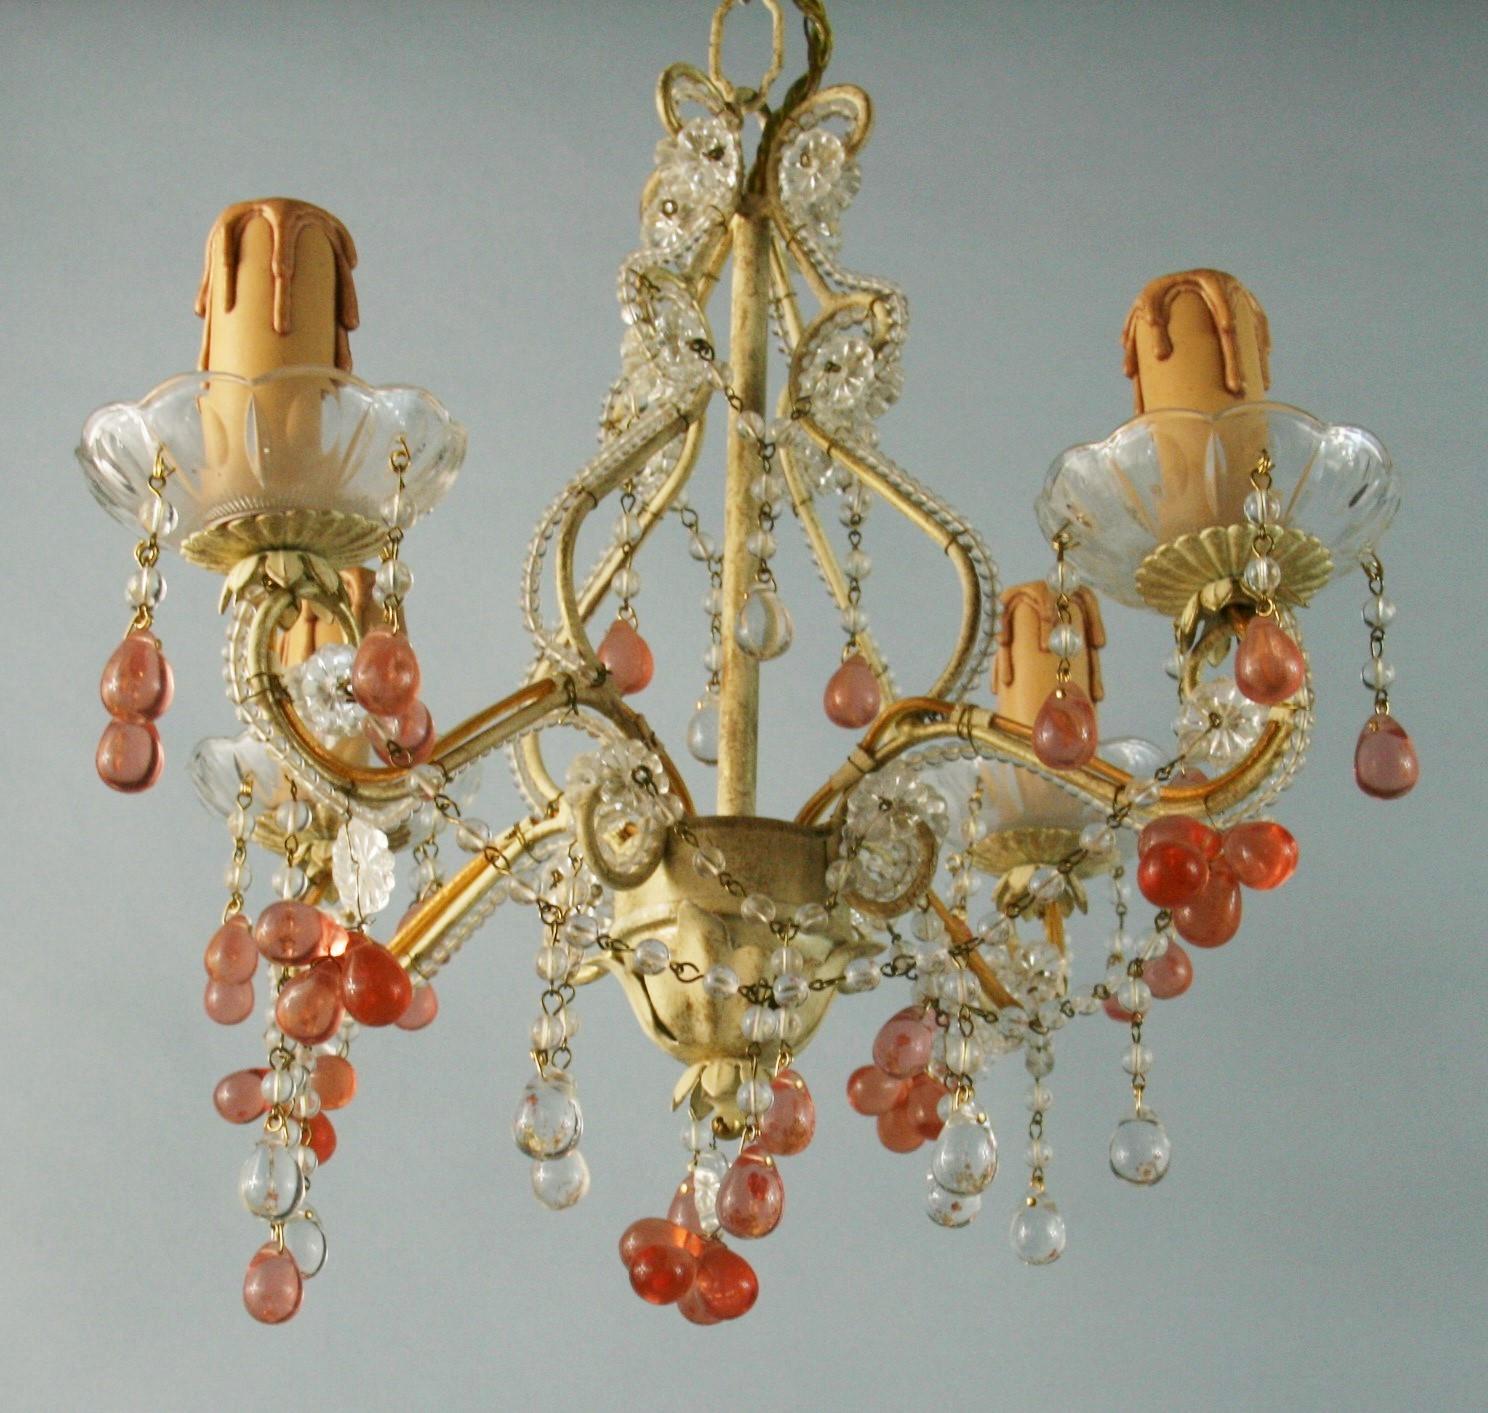 Italian Beaded Glass 4 light Chandelier with Rose Grape Drops 1960's For Sale 4